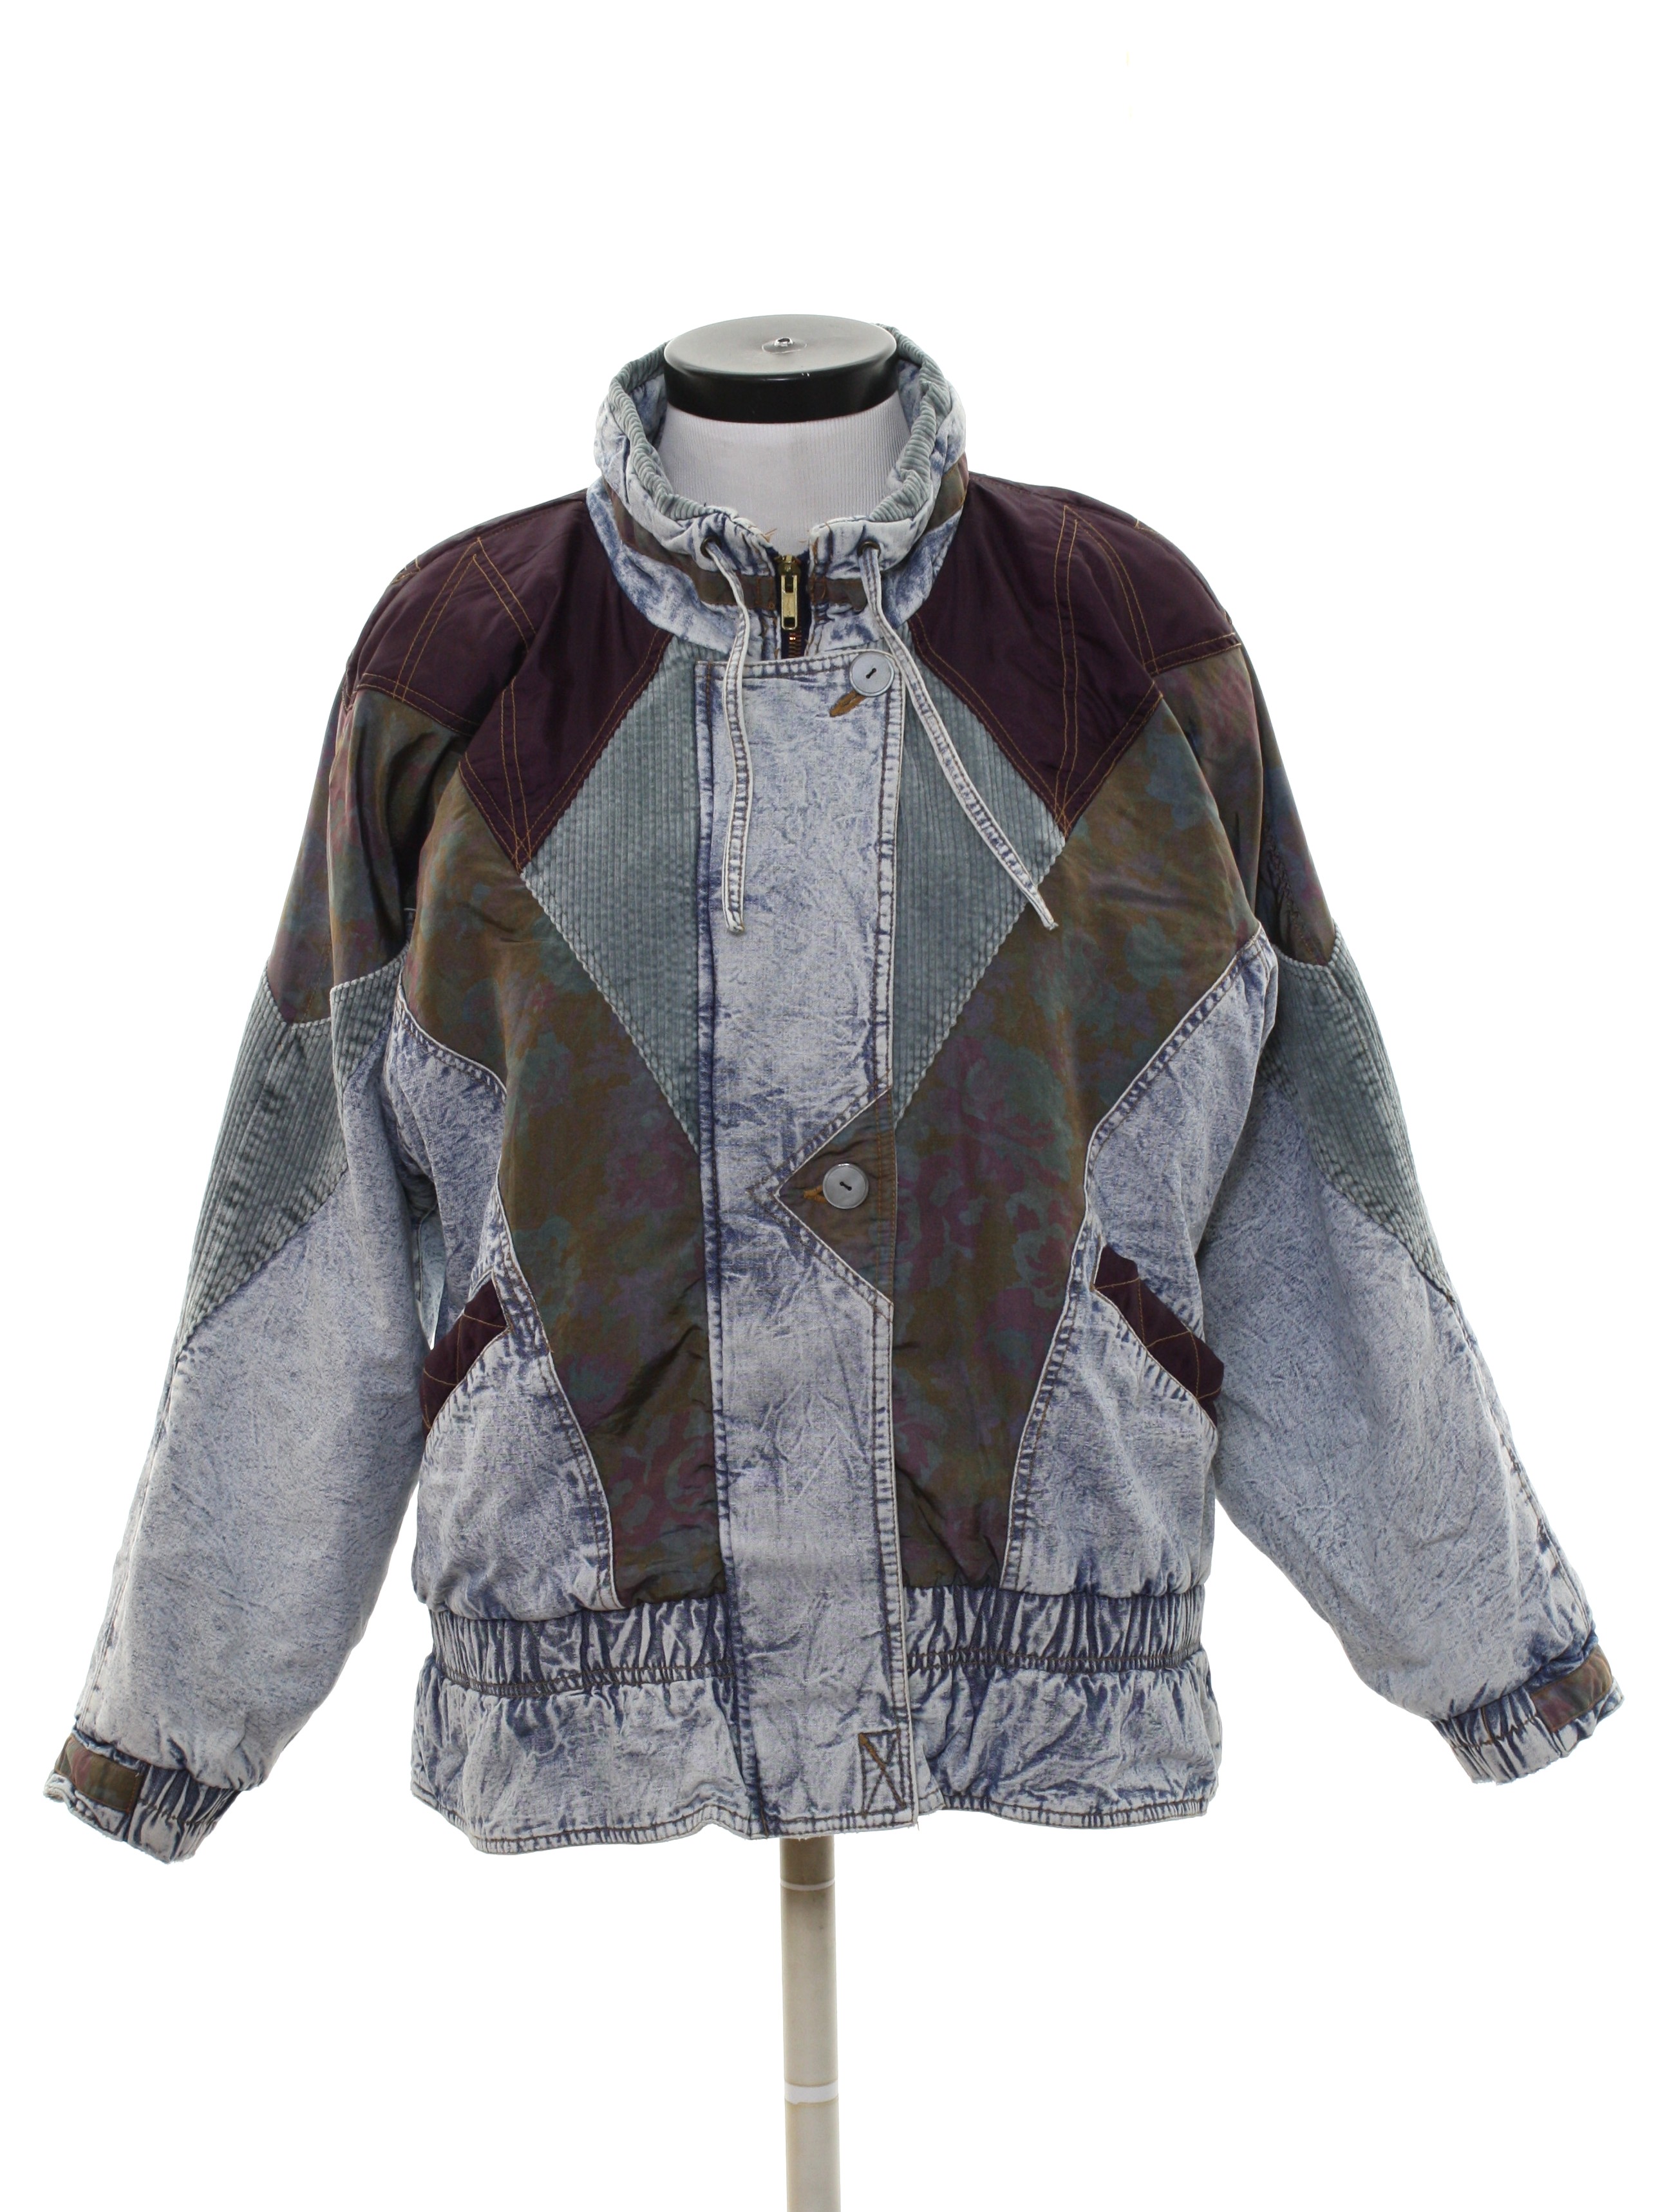 1980's Jacket (New York Girl): Late 80s or Early 90s -New York Girl ...